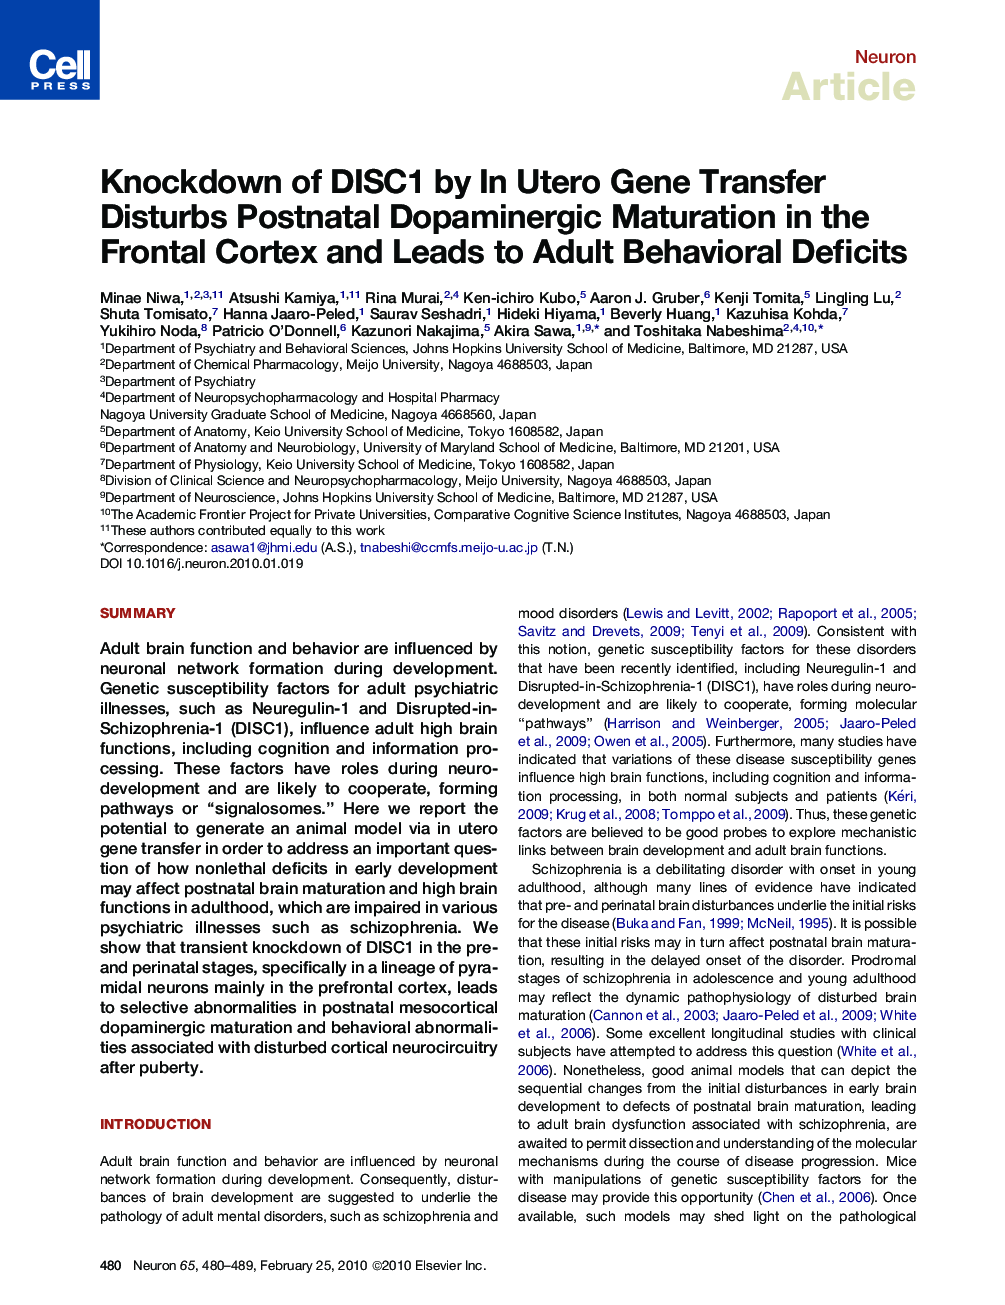 Knockdown of DISC1 by In Utero Gene Transfer Disturbs Postnatal Dopaminergic Maturation in the Frontal Cortex and Leads to Adult Behavioral Deficits